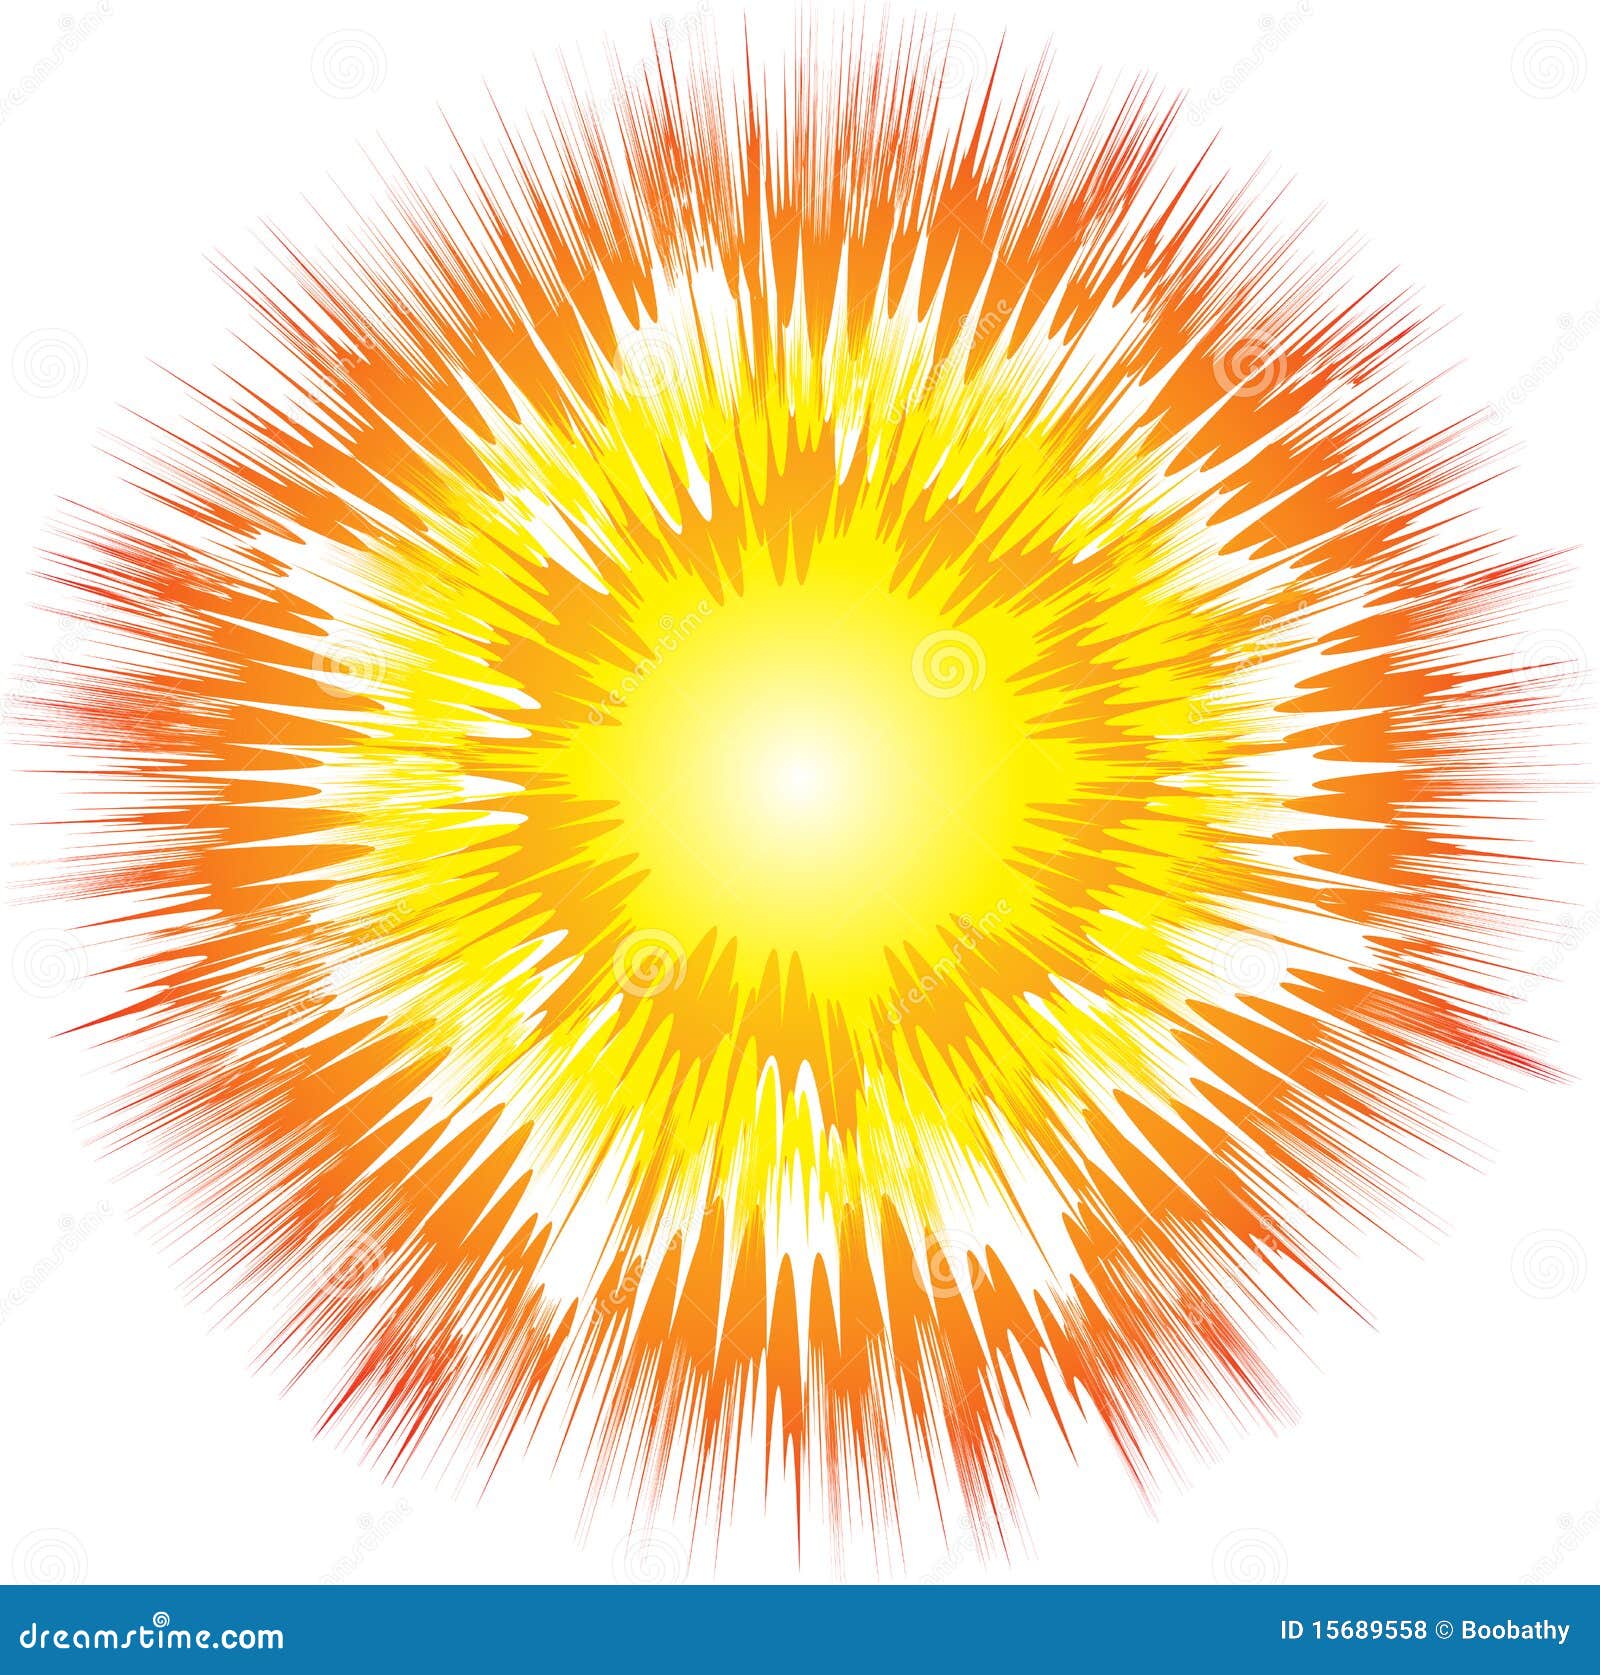 clipart explosion download - photo #31